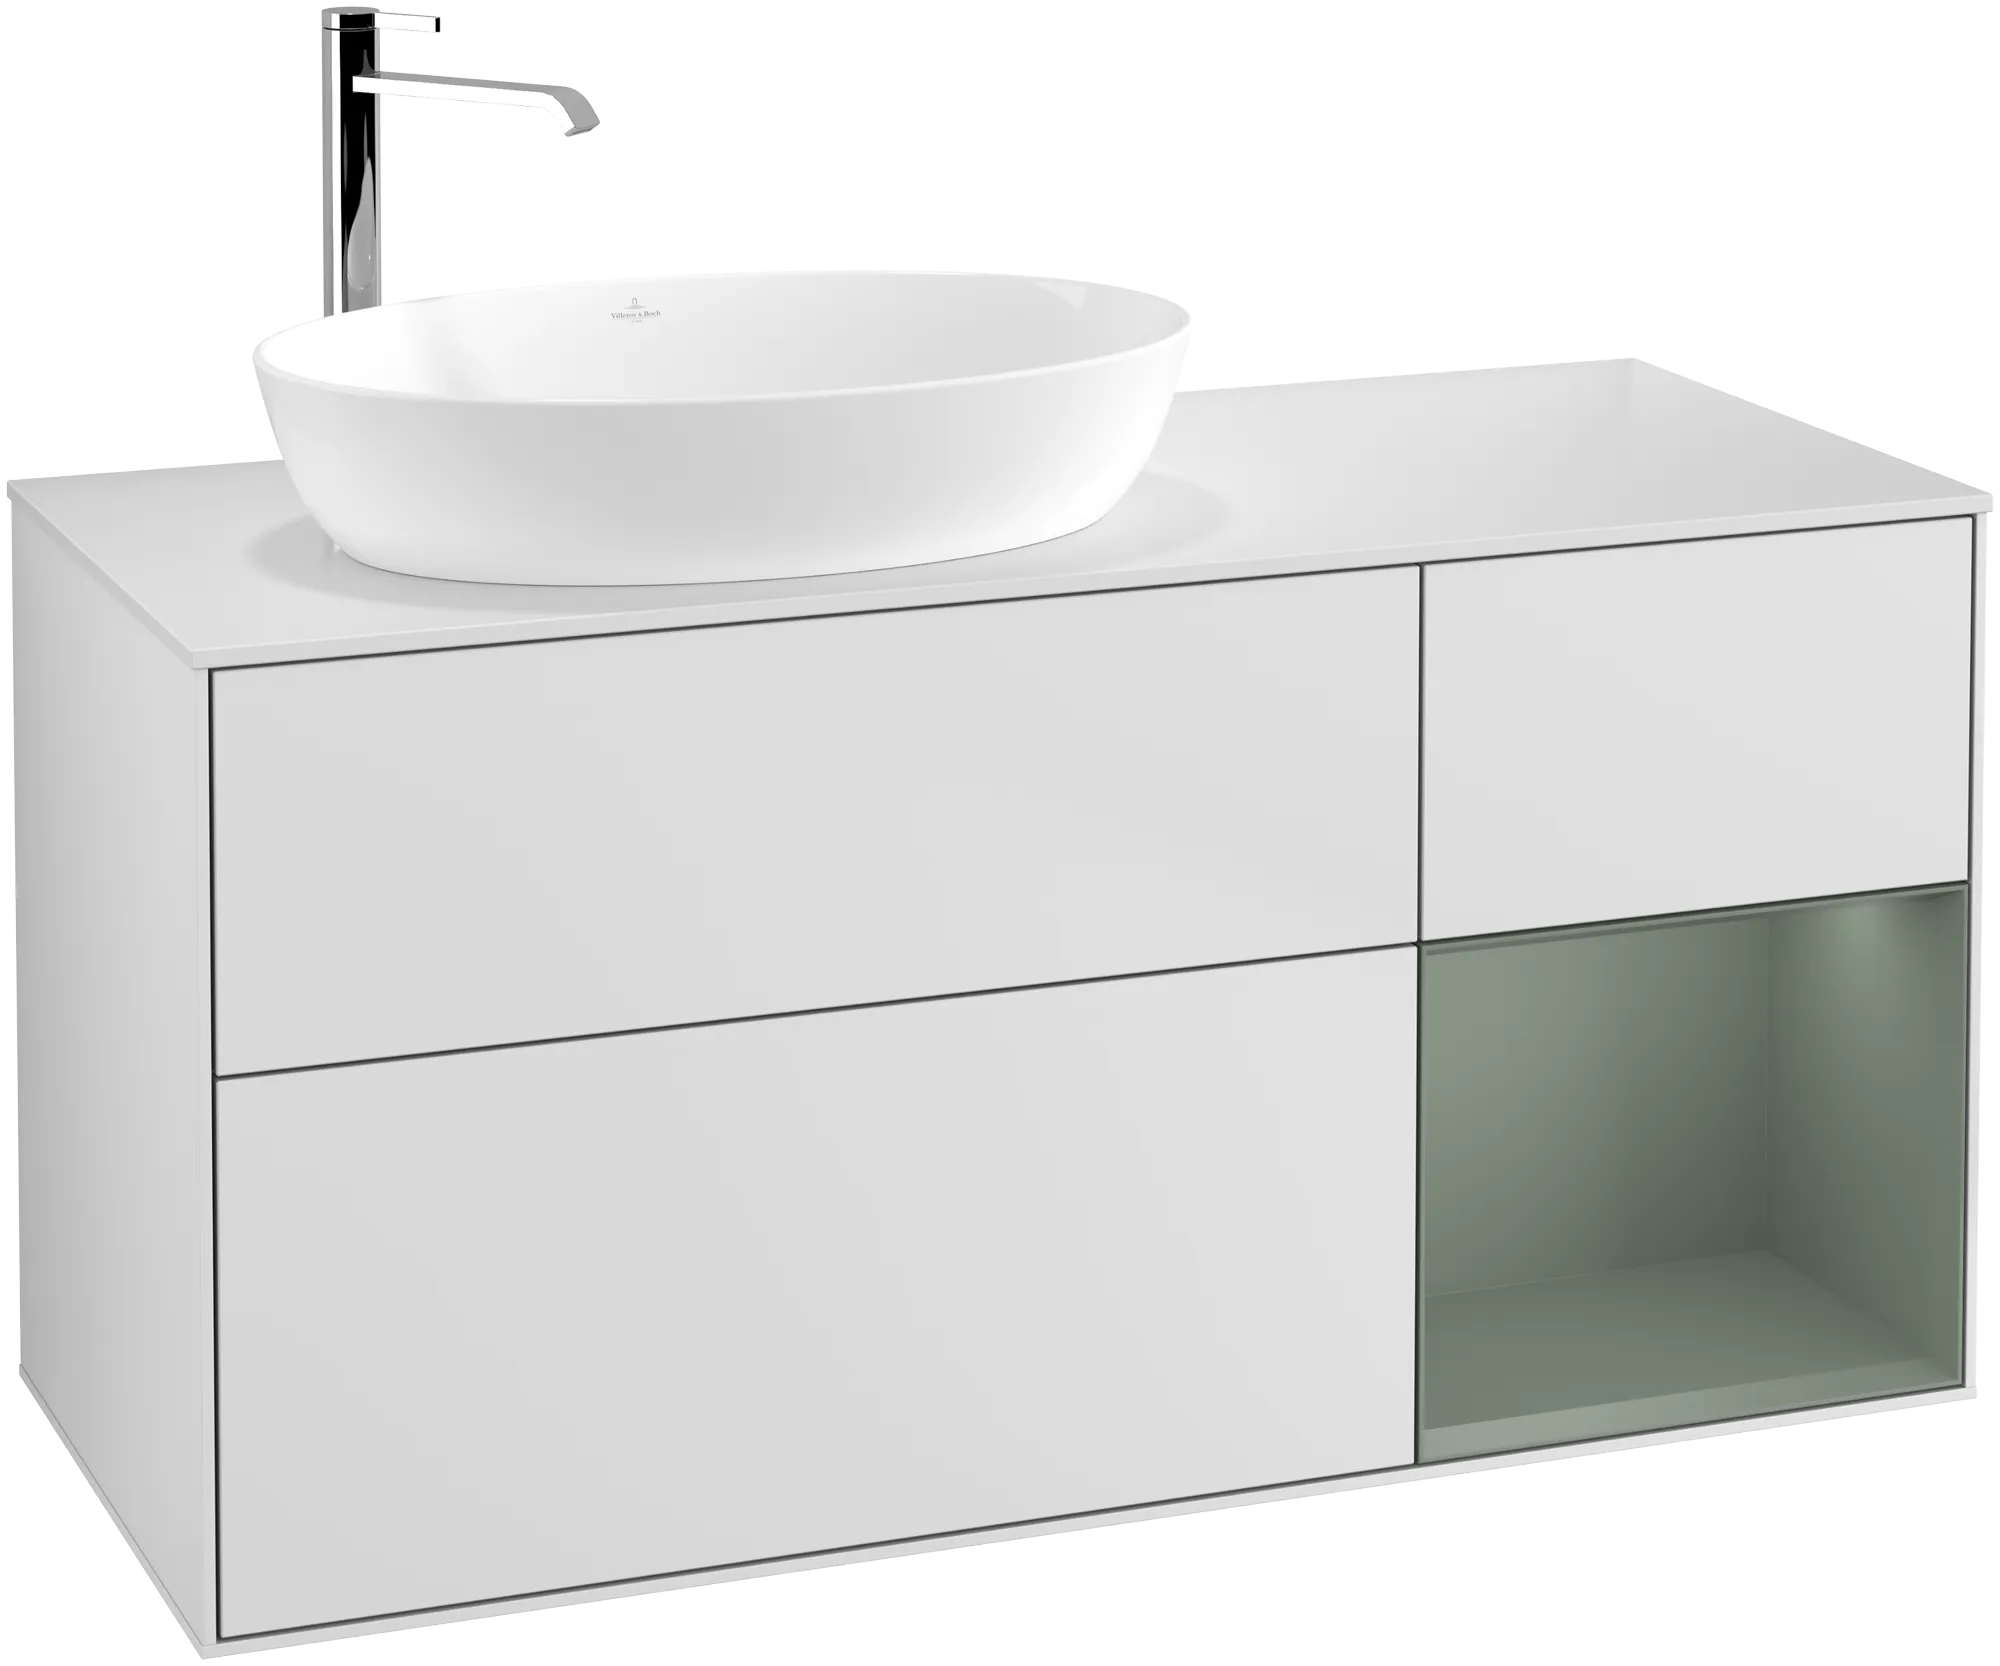 VILLEROY BOCH Finion Vanity unit, with lighting, 3 pull-out compartments, 1200 x 603 x 501 mm, White Matt Lacquer / Olive Matt Lacquer / Glass White Matt #G931GMMT resmi